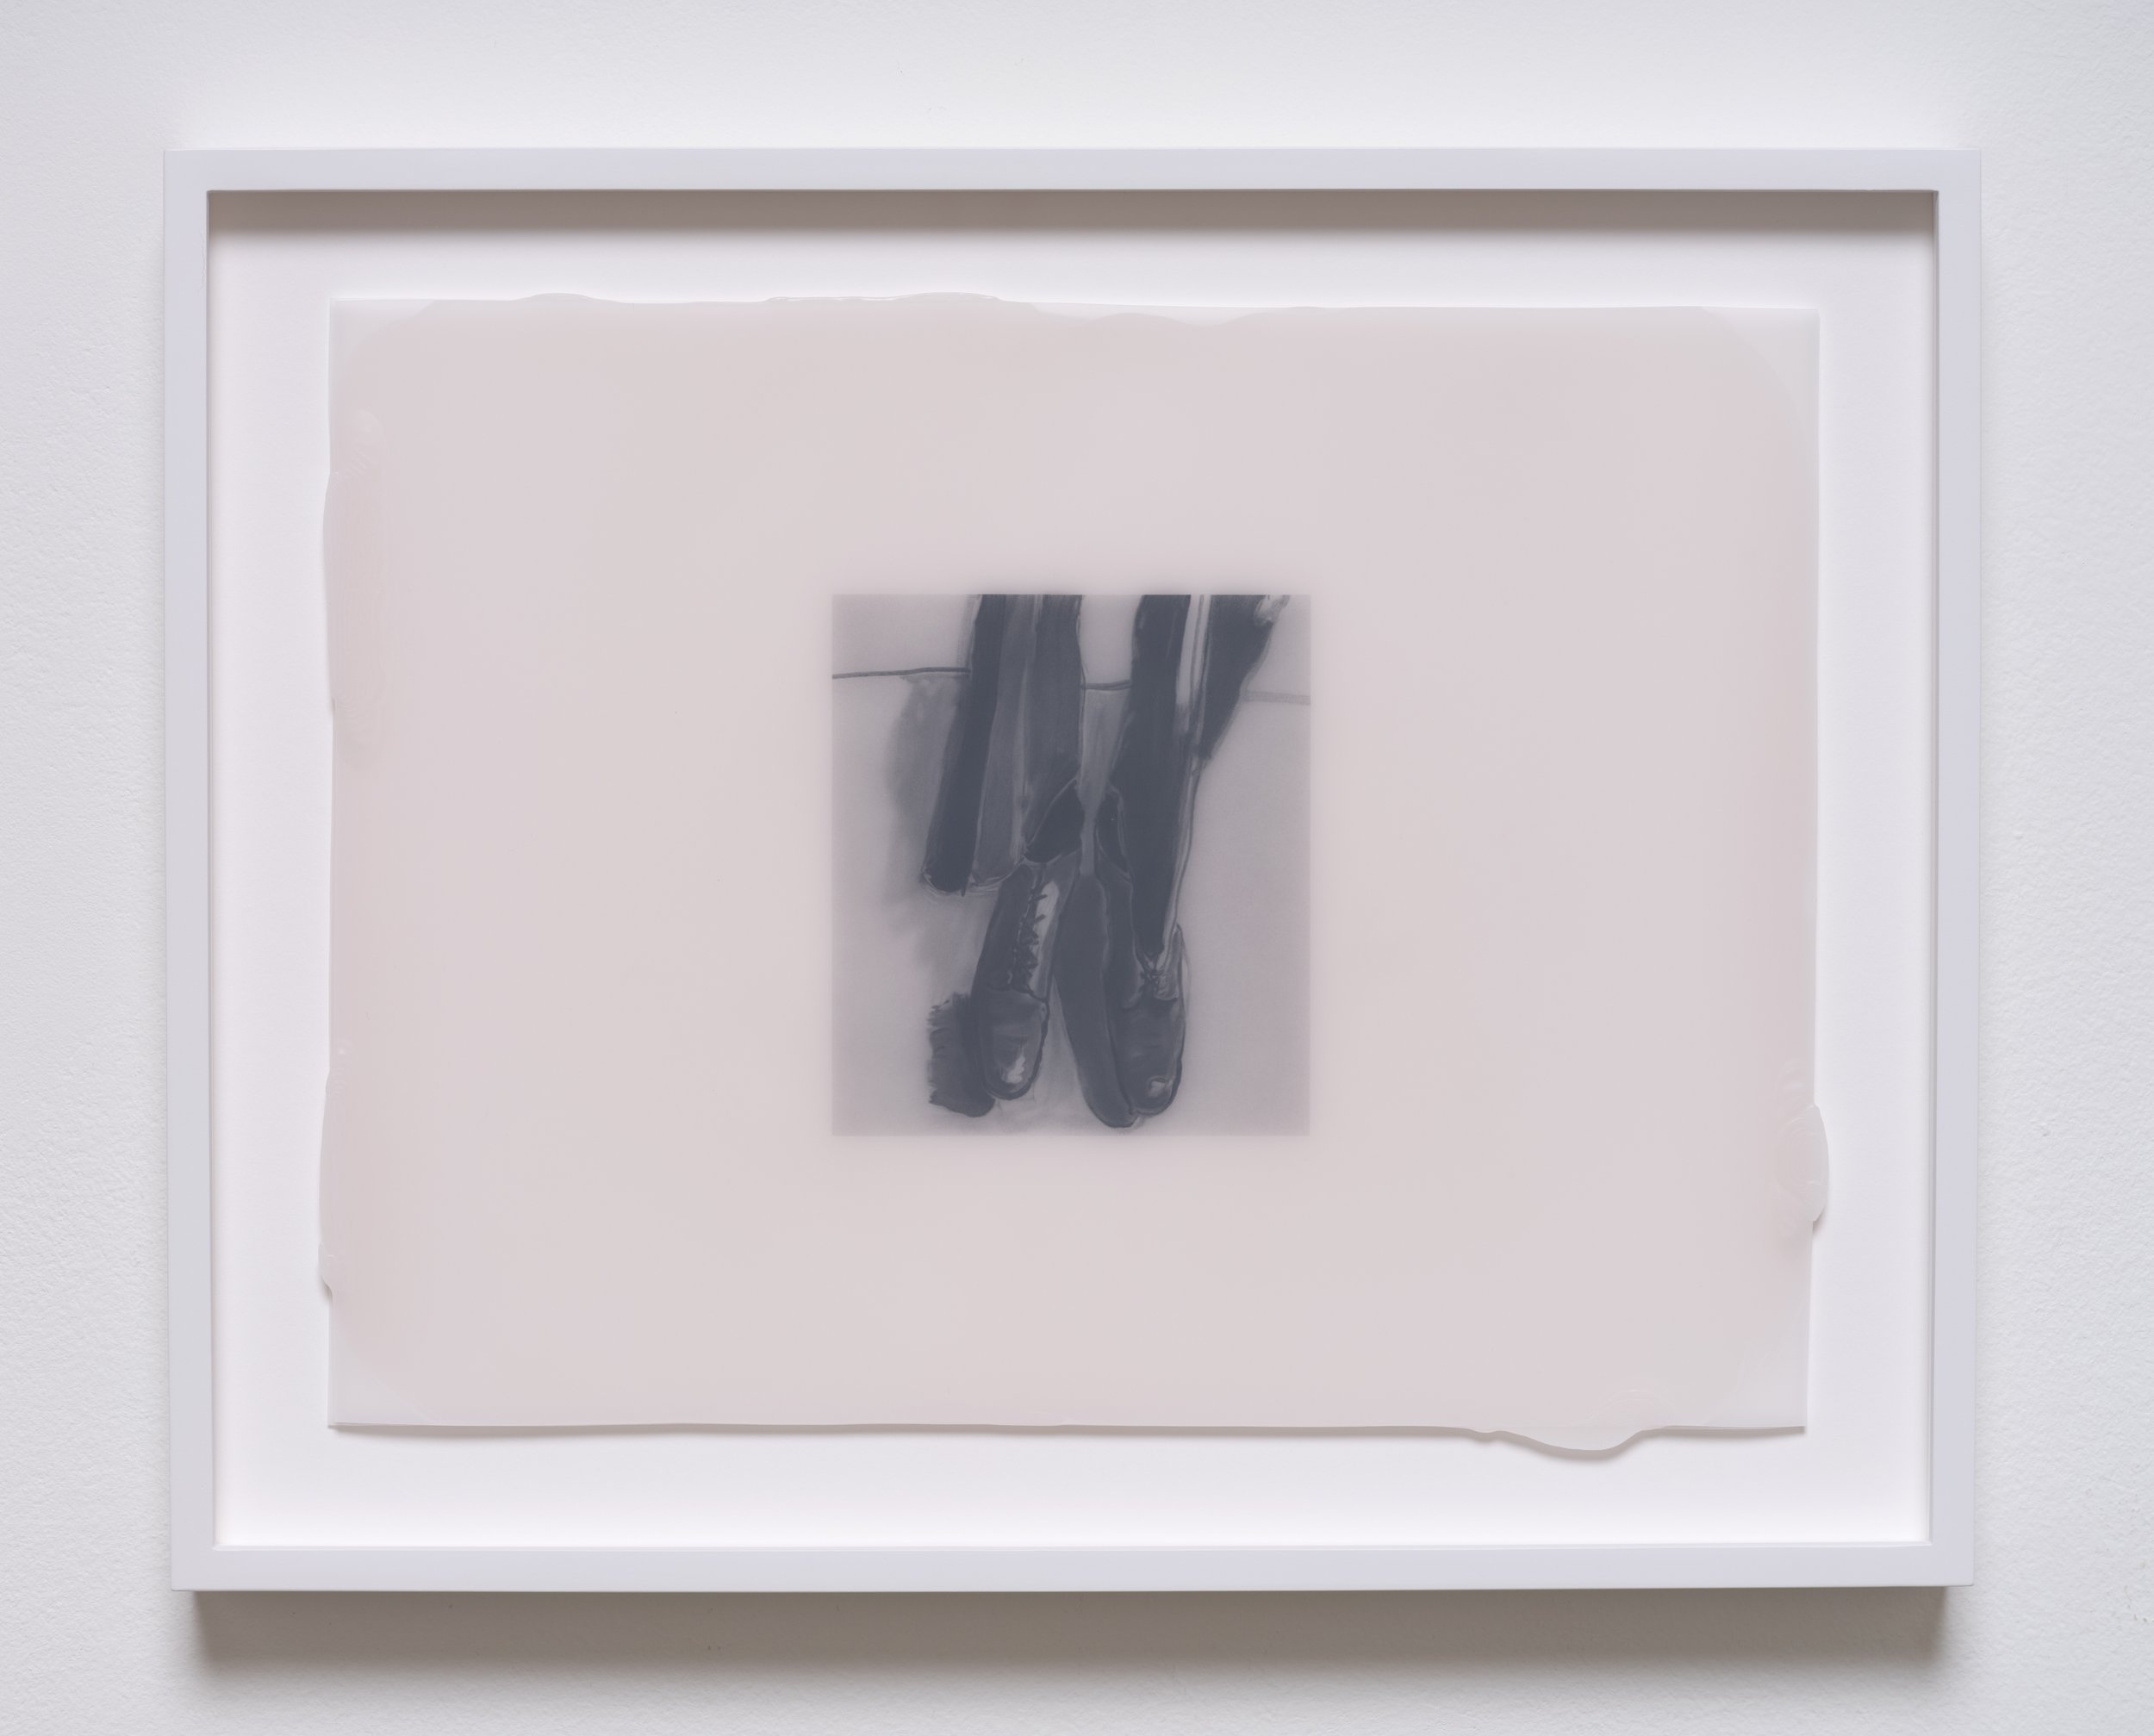   AN.1970.46.2023 , 2023 Graphite, wax, and drafting film 13 x 16 1/2 x 1 1/2 inches (framed)&nbsp; 